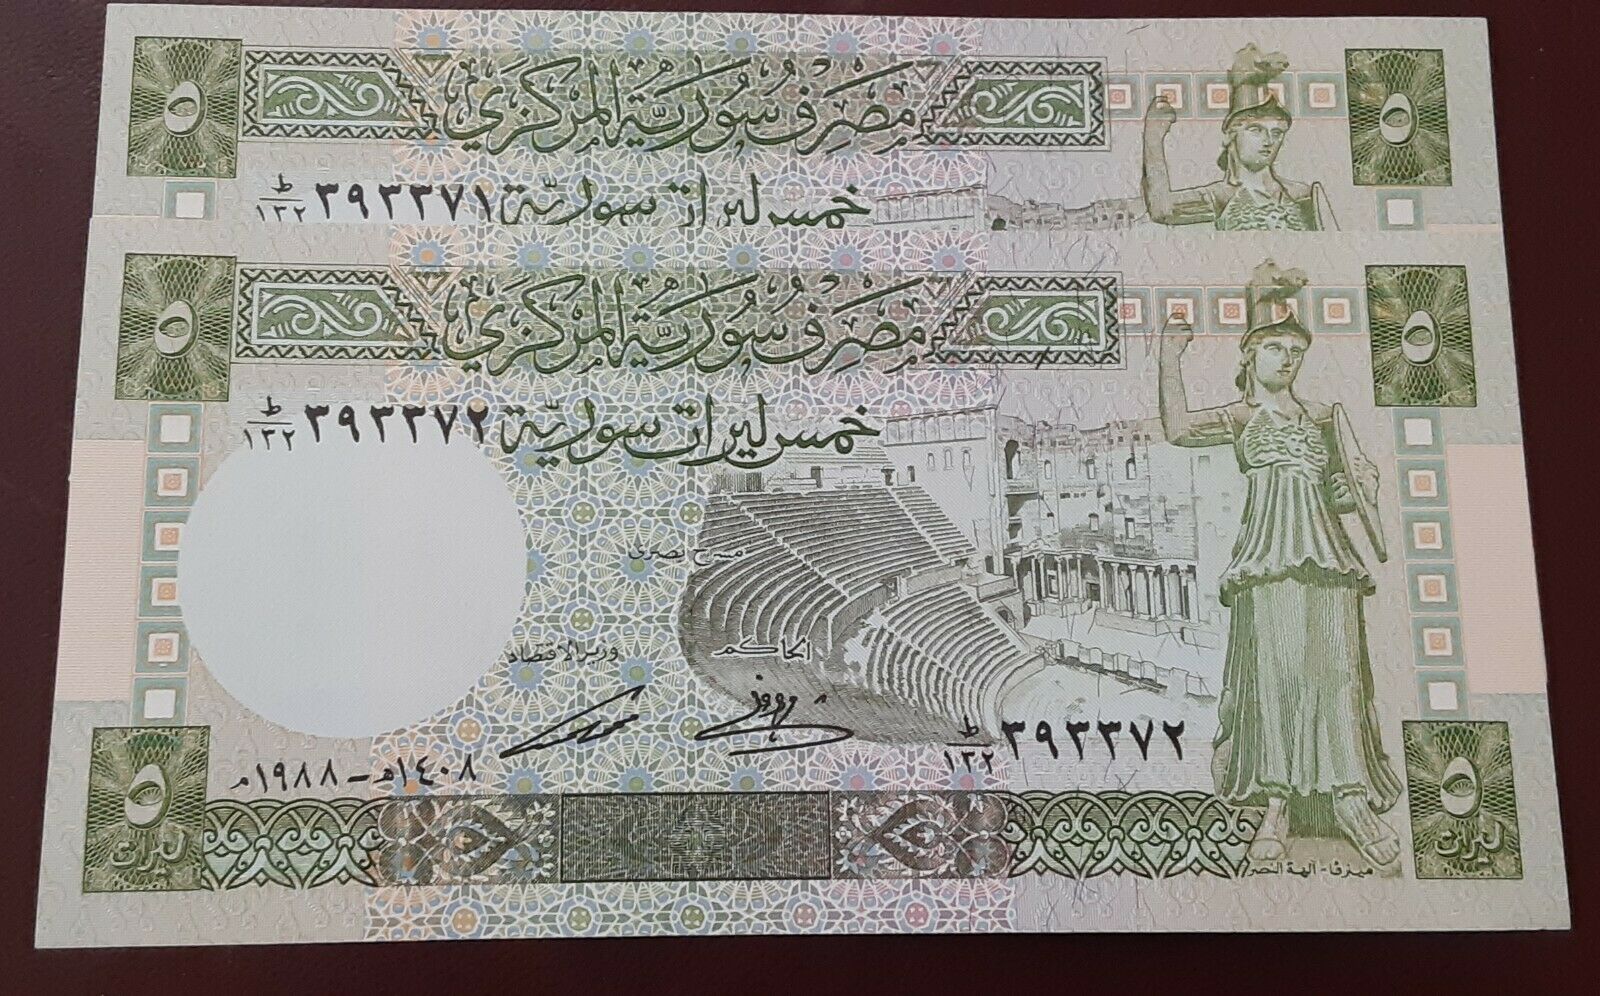 Syria 2 Sequential Number uncirculated  1988 5 Lira Pound Banknotes